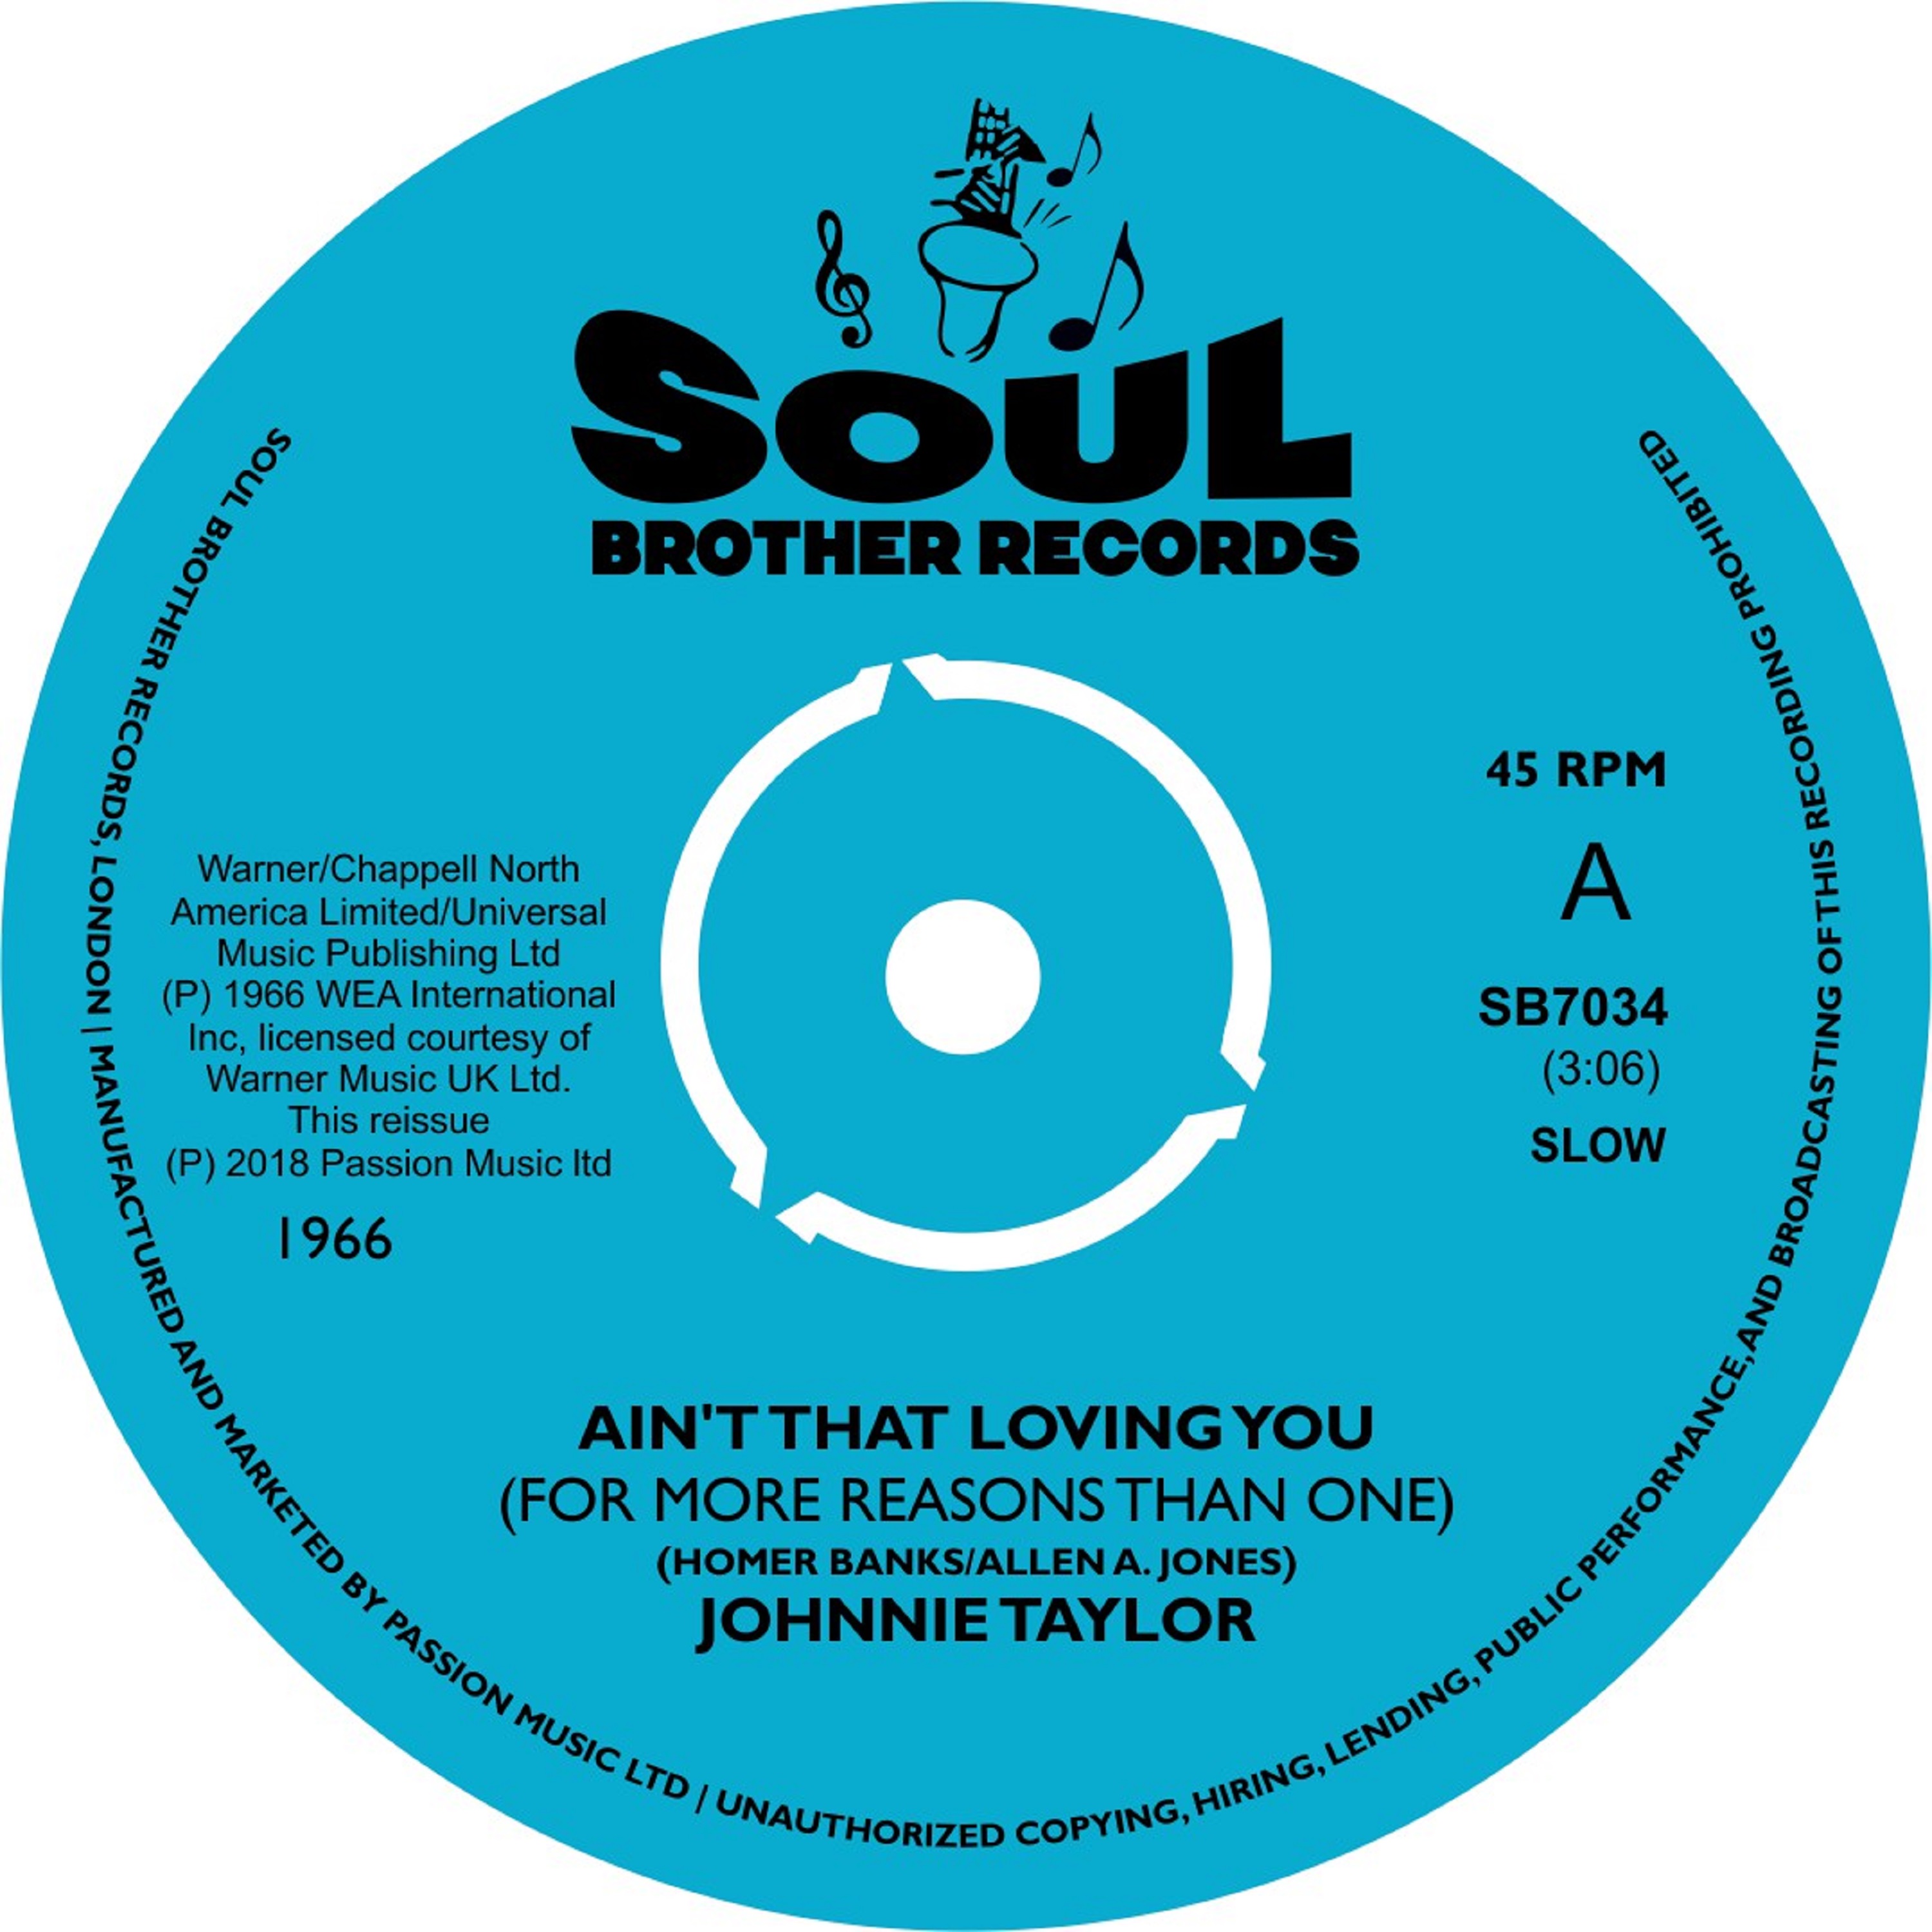 Johnnie Taylor/AIN'T THAT LOVING YOU 7"